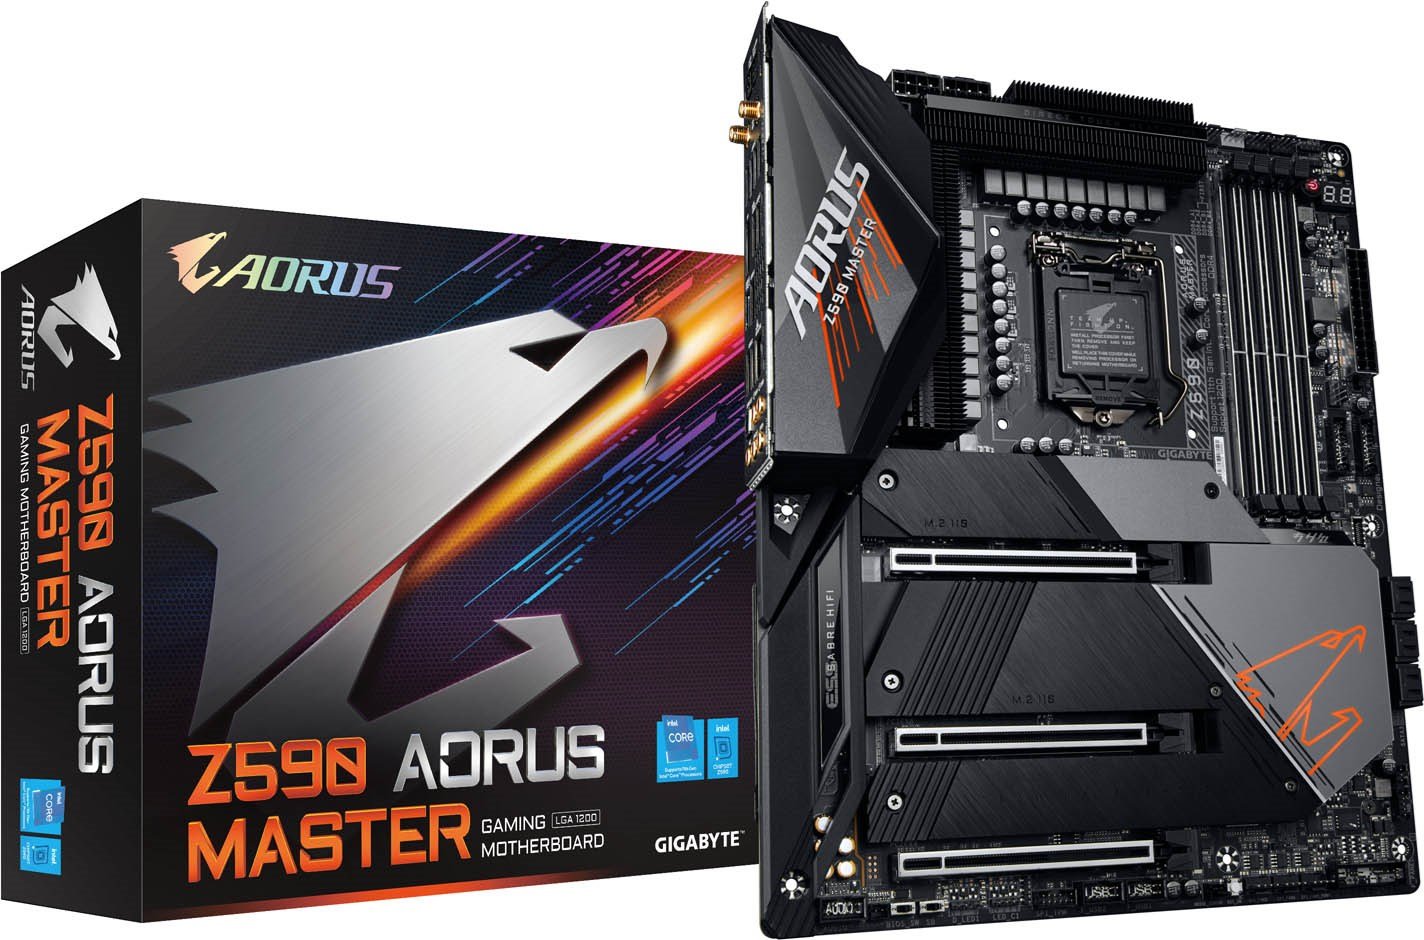 how to reformat windows 10 with aorus mother board